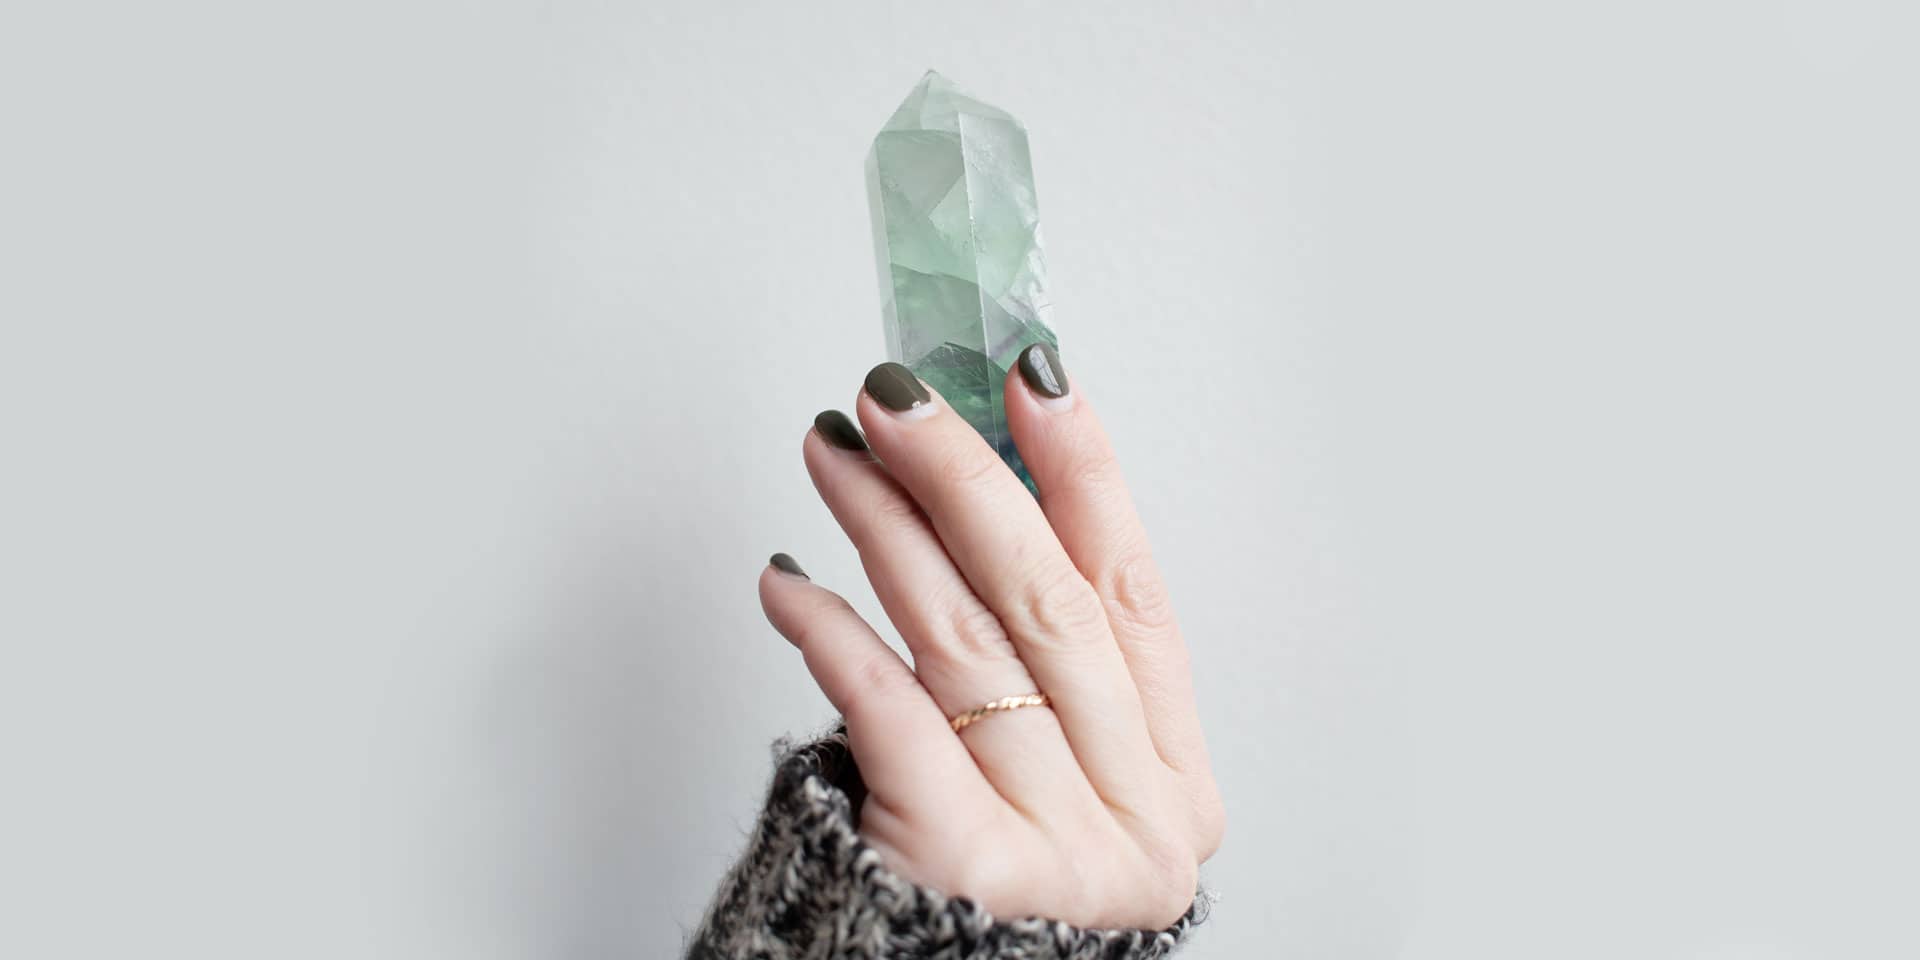 A person's hand with dark, witchy nail polish holding a large, translucent green crystal against a plain, light background.